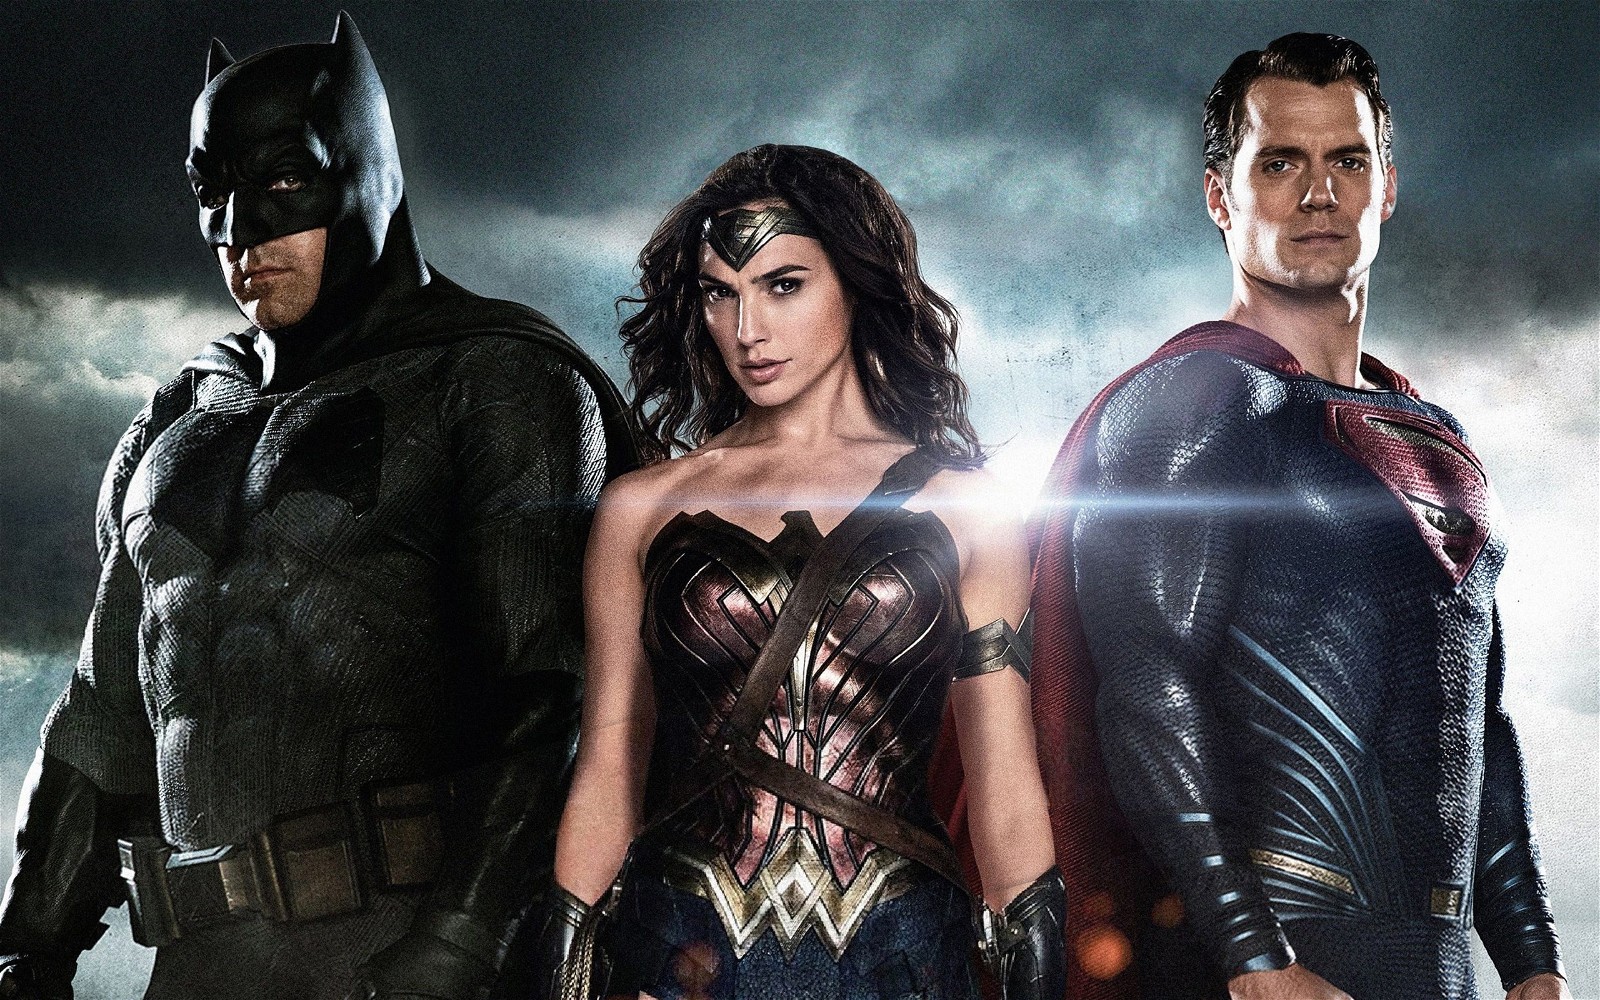 Many DC films including Batman v Superman: Dawn of Justice are now streaming on Netflix